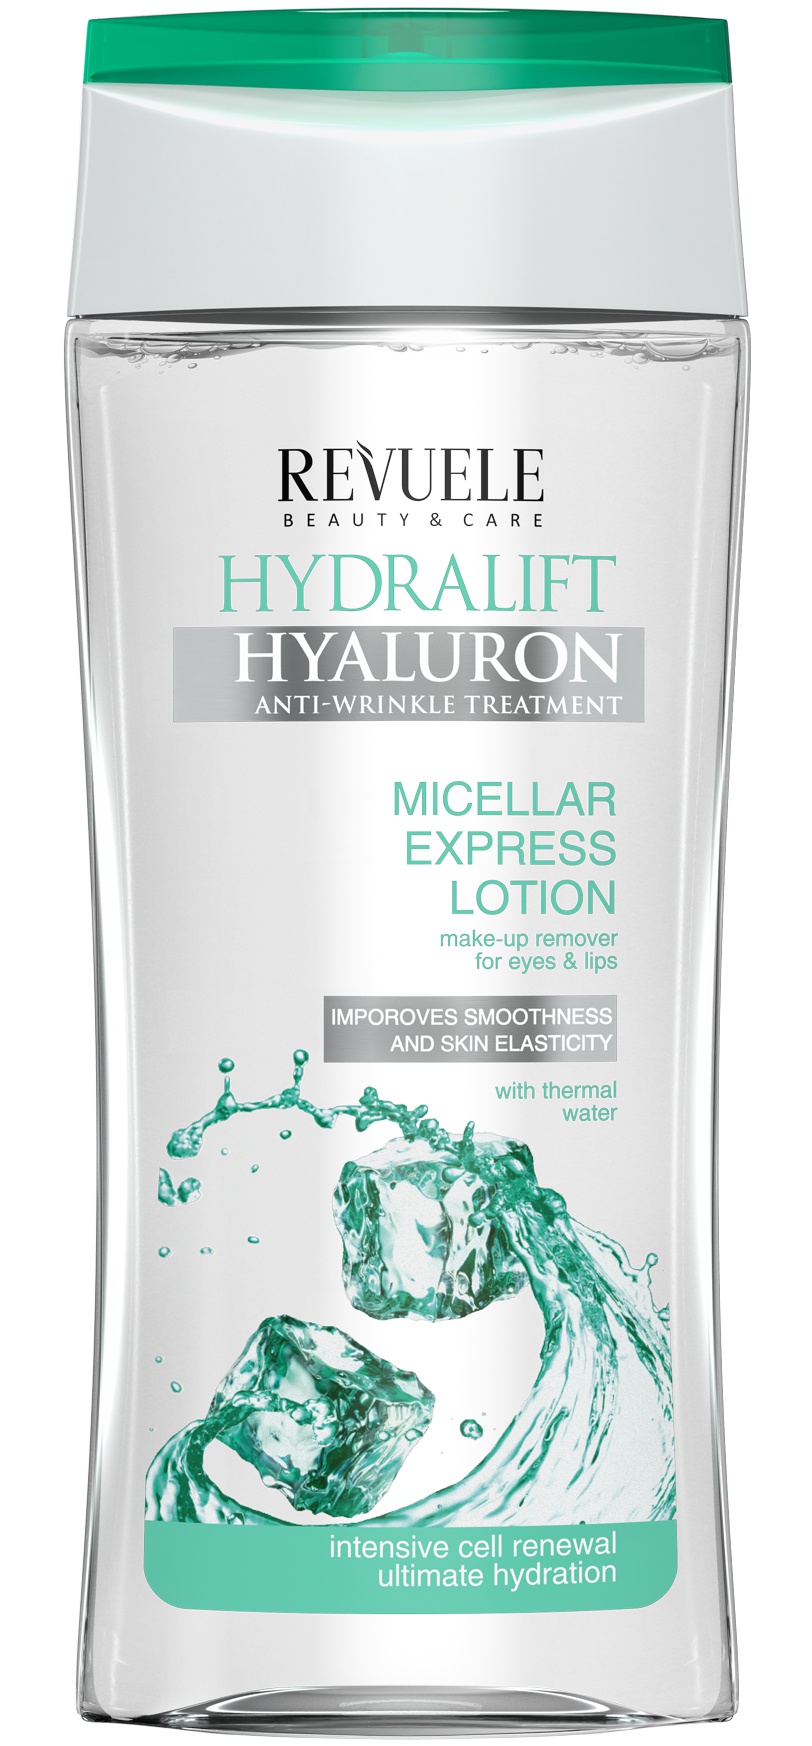 Revuele Hydralift Hyaluron Micellar Express Lotion